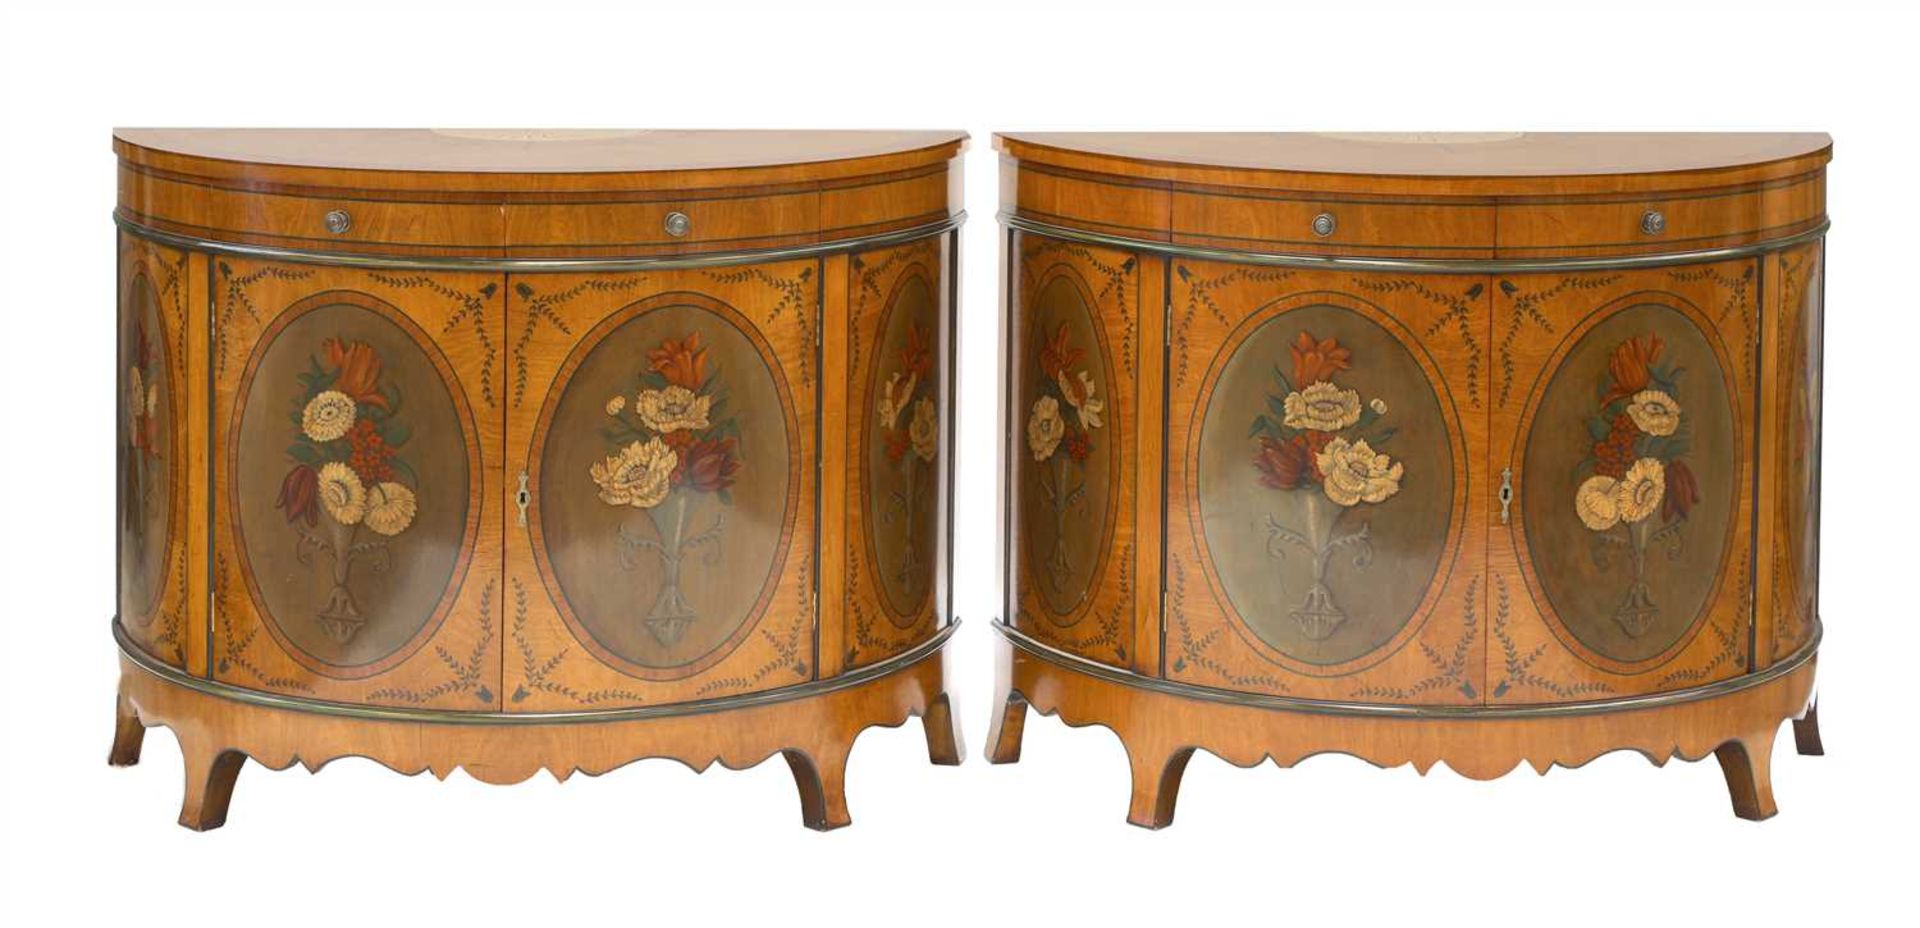 A pair of George III-style demilune cabinets,